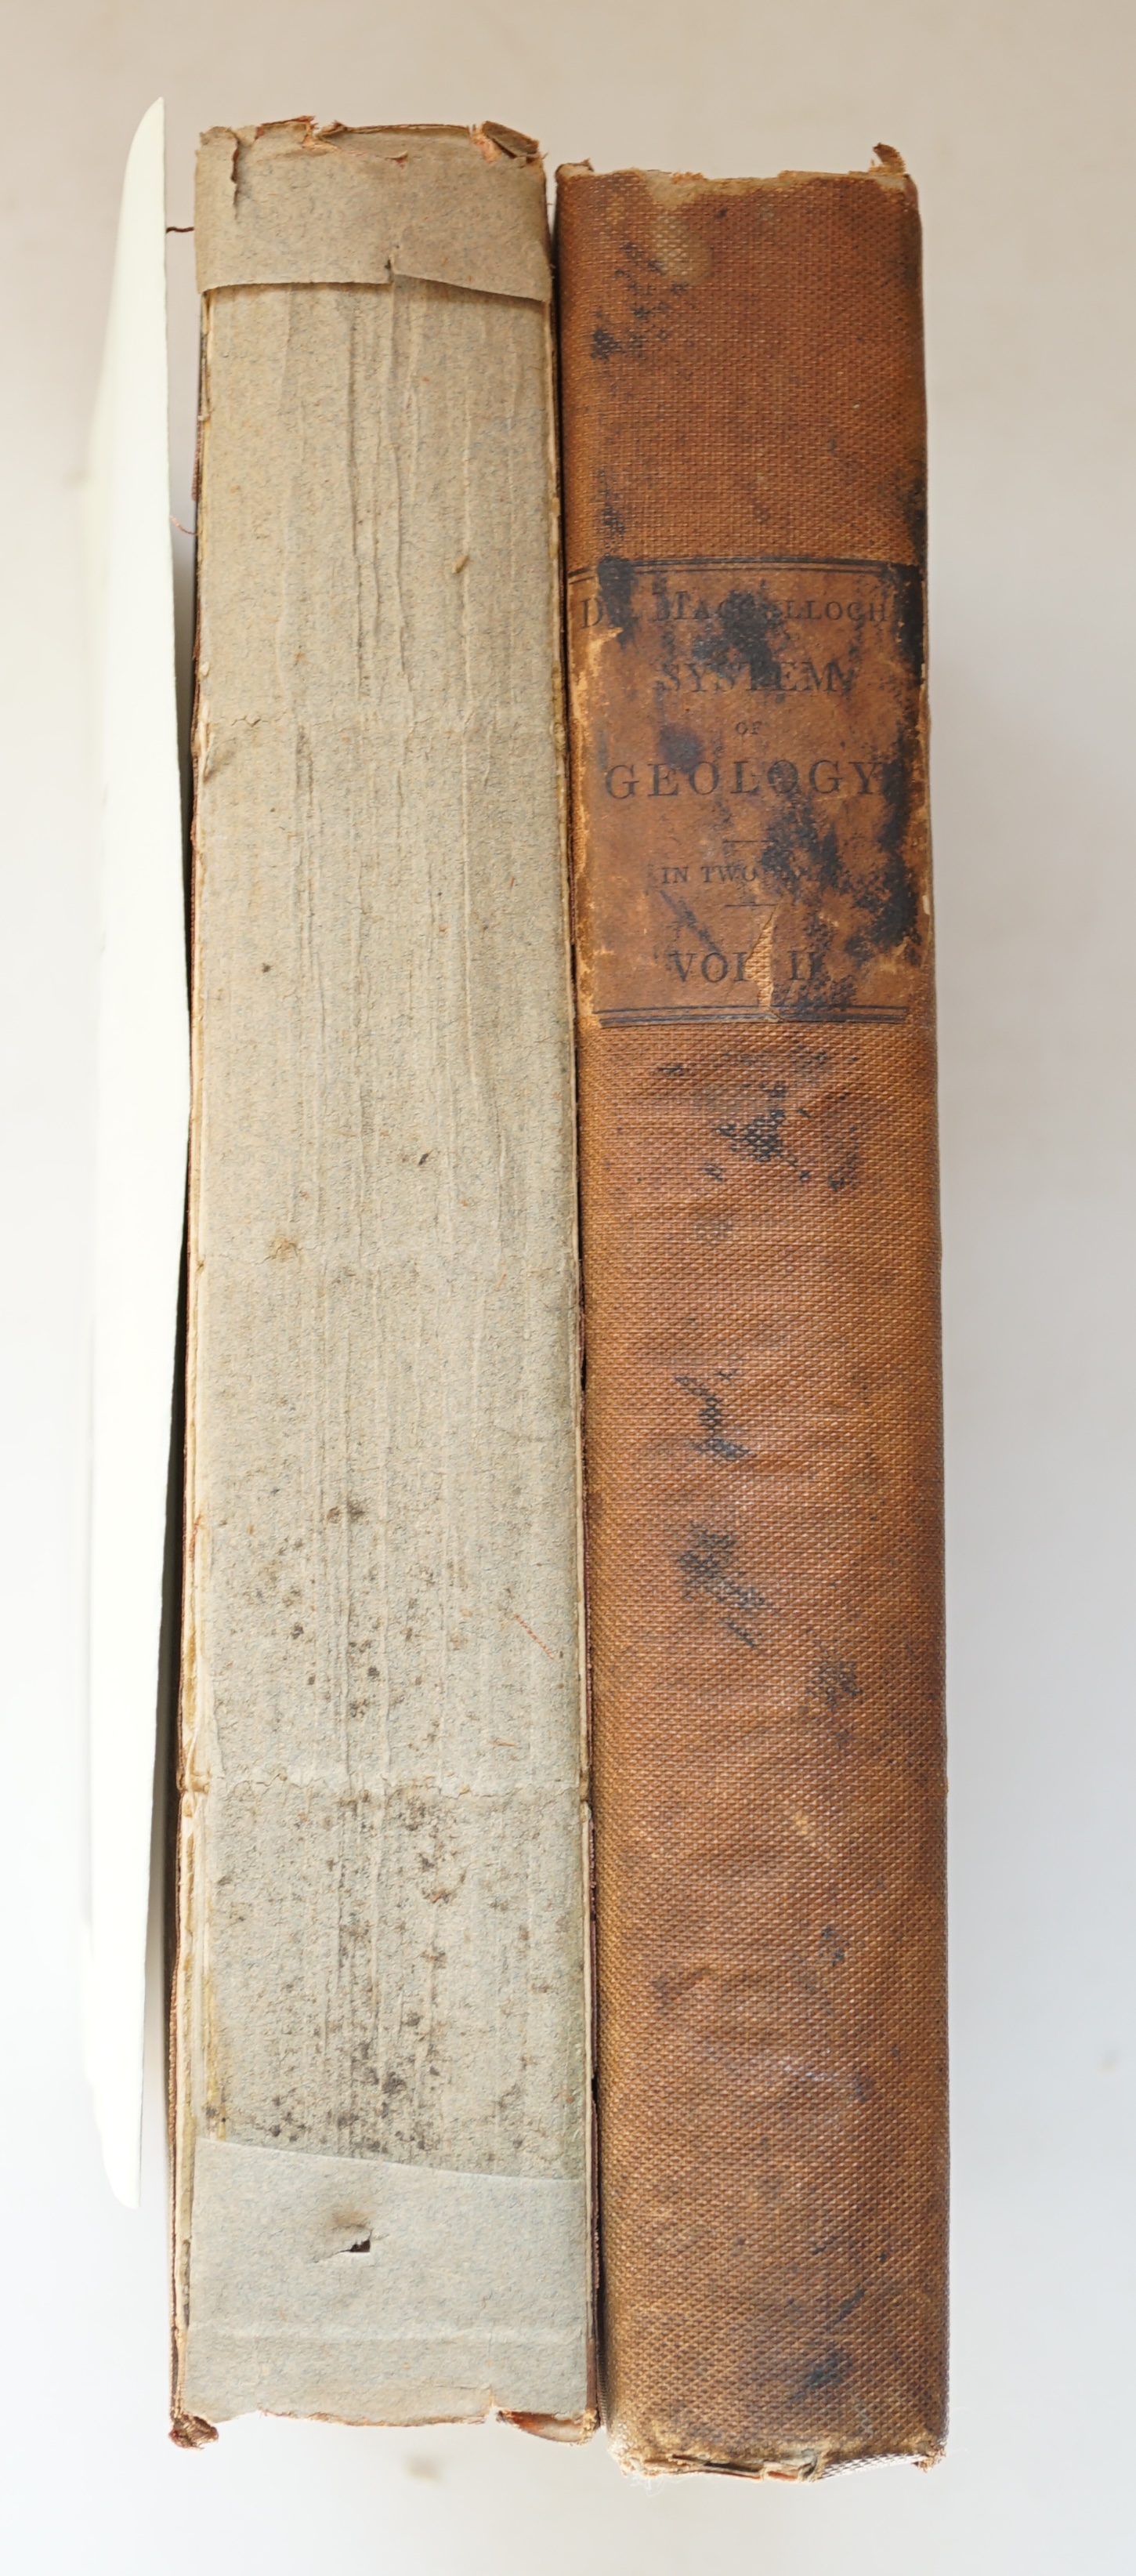 Macculoch, James - A System of Geology, with a Theory of the Earth, 1st edition, 2 vols, 8vo, cloth, stained with spine detached to vol. 1, Longman, Rees, Orme, Brown and Green, London, 1831.